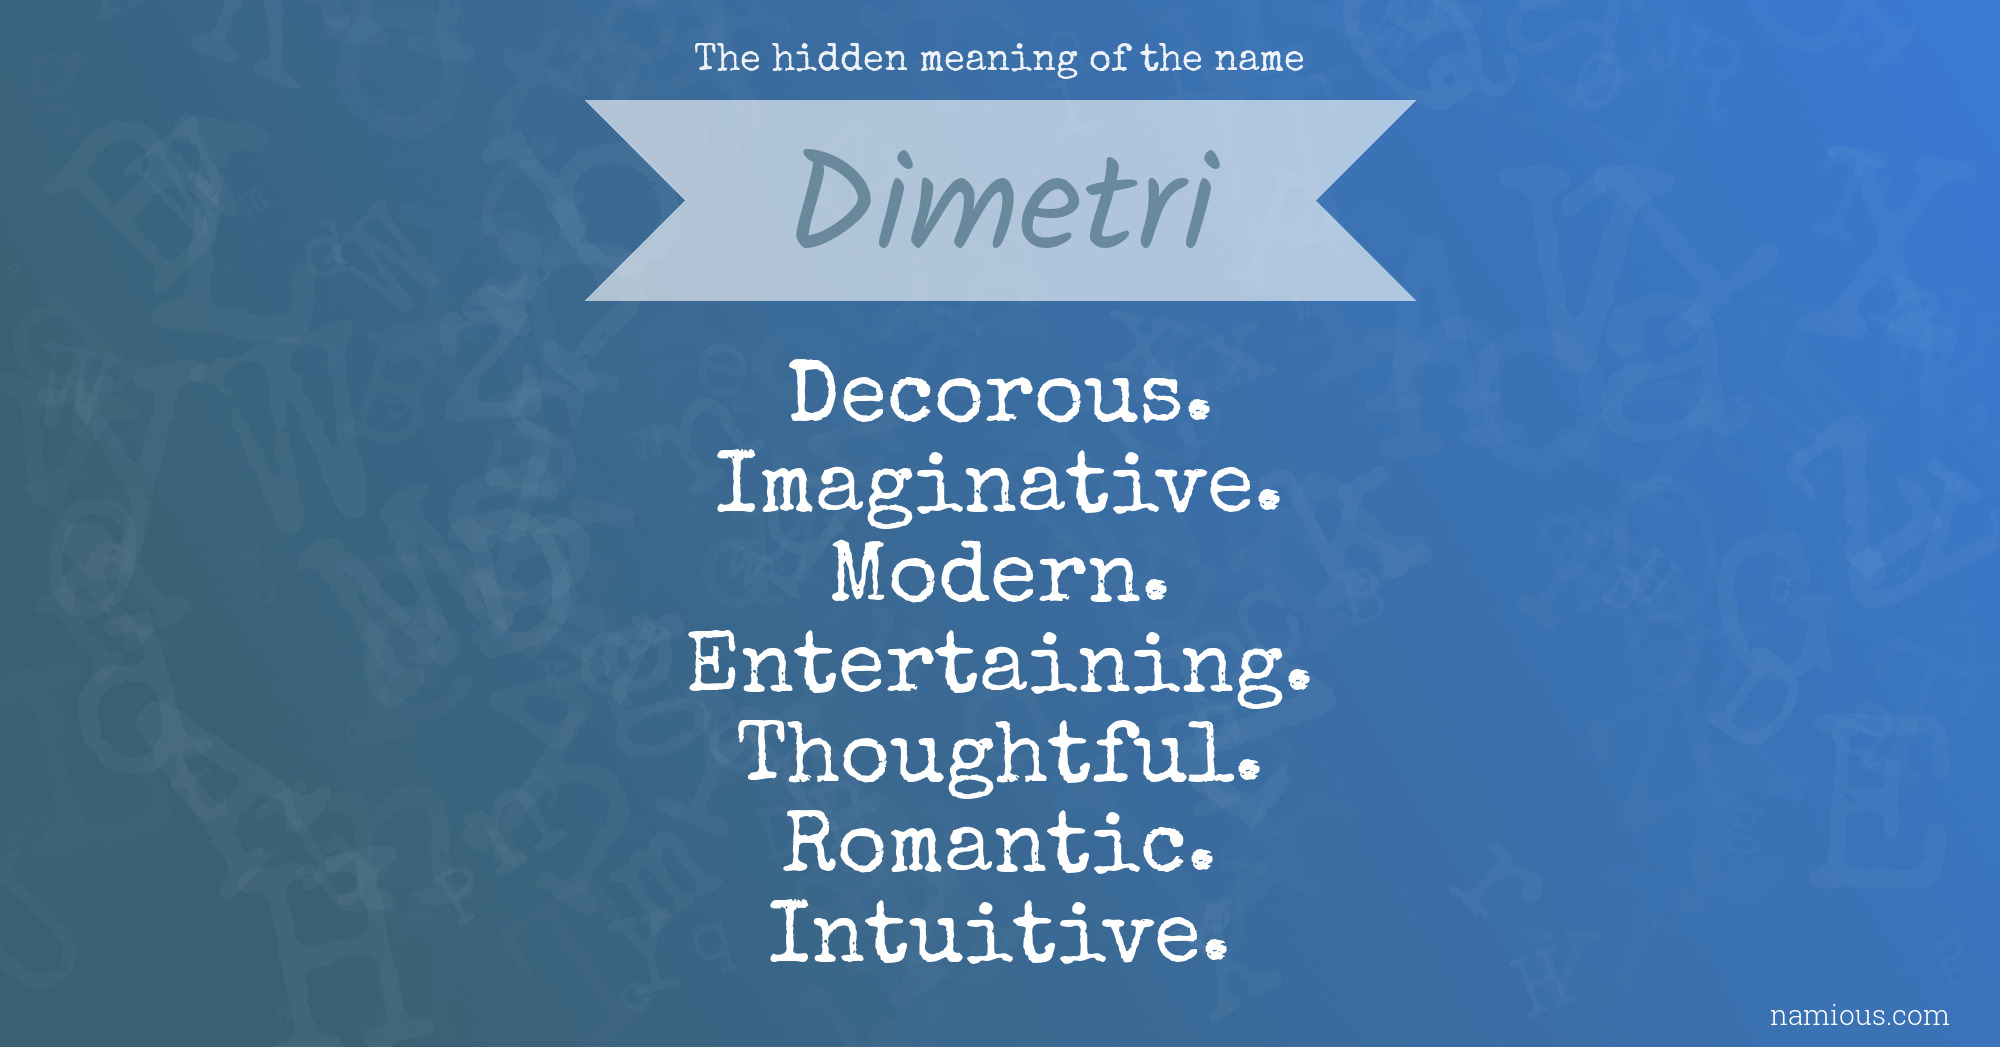 The hidden meaning of the name Dimetri